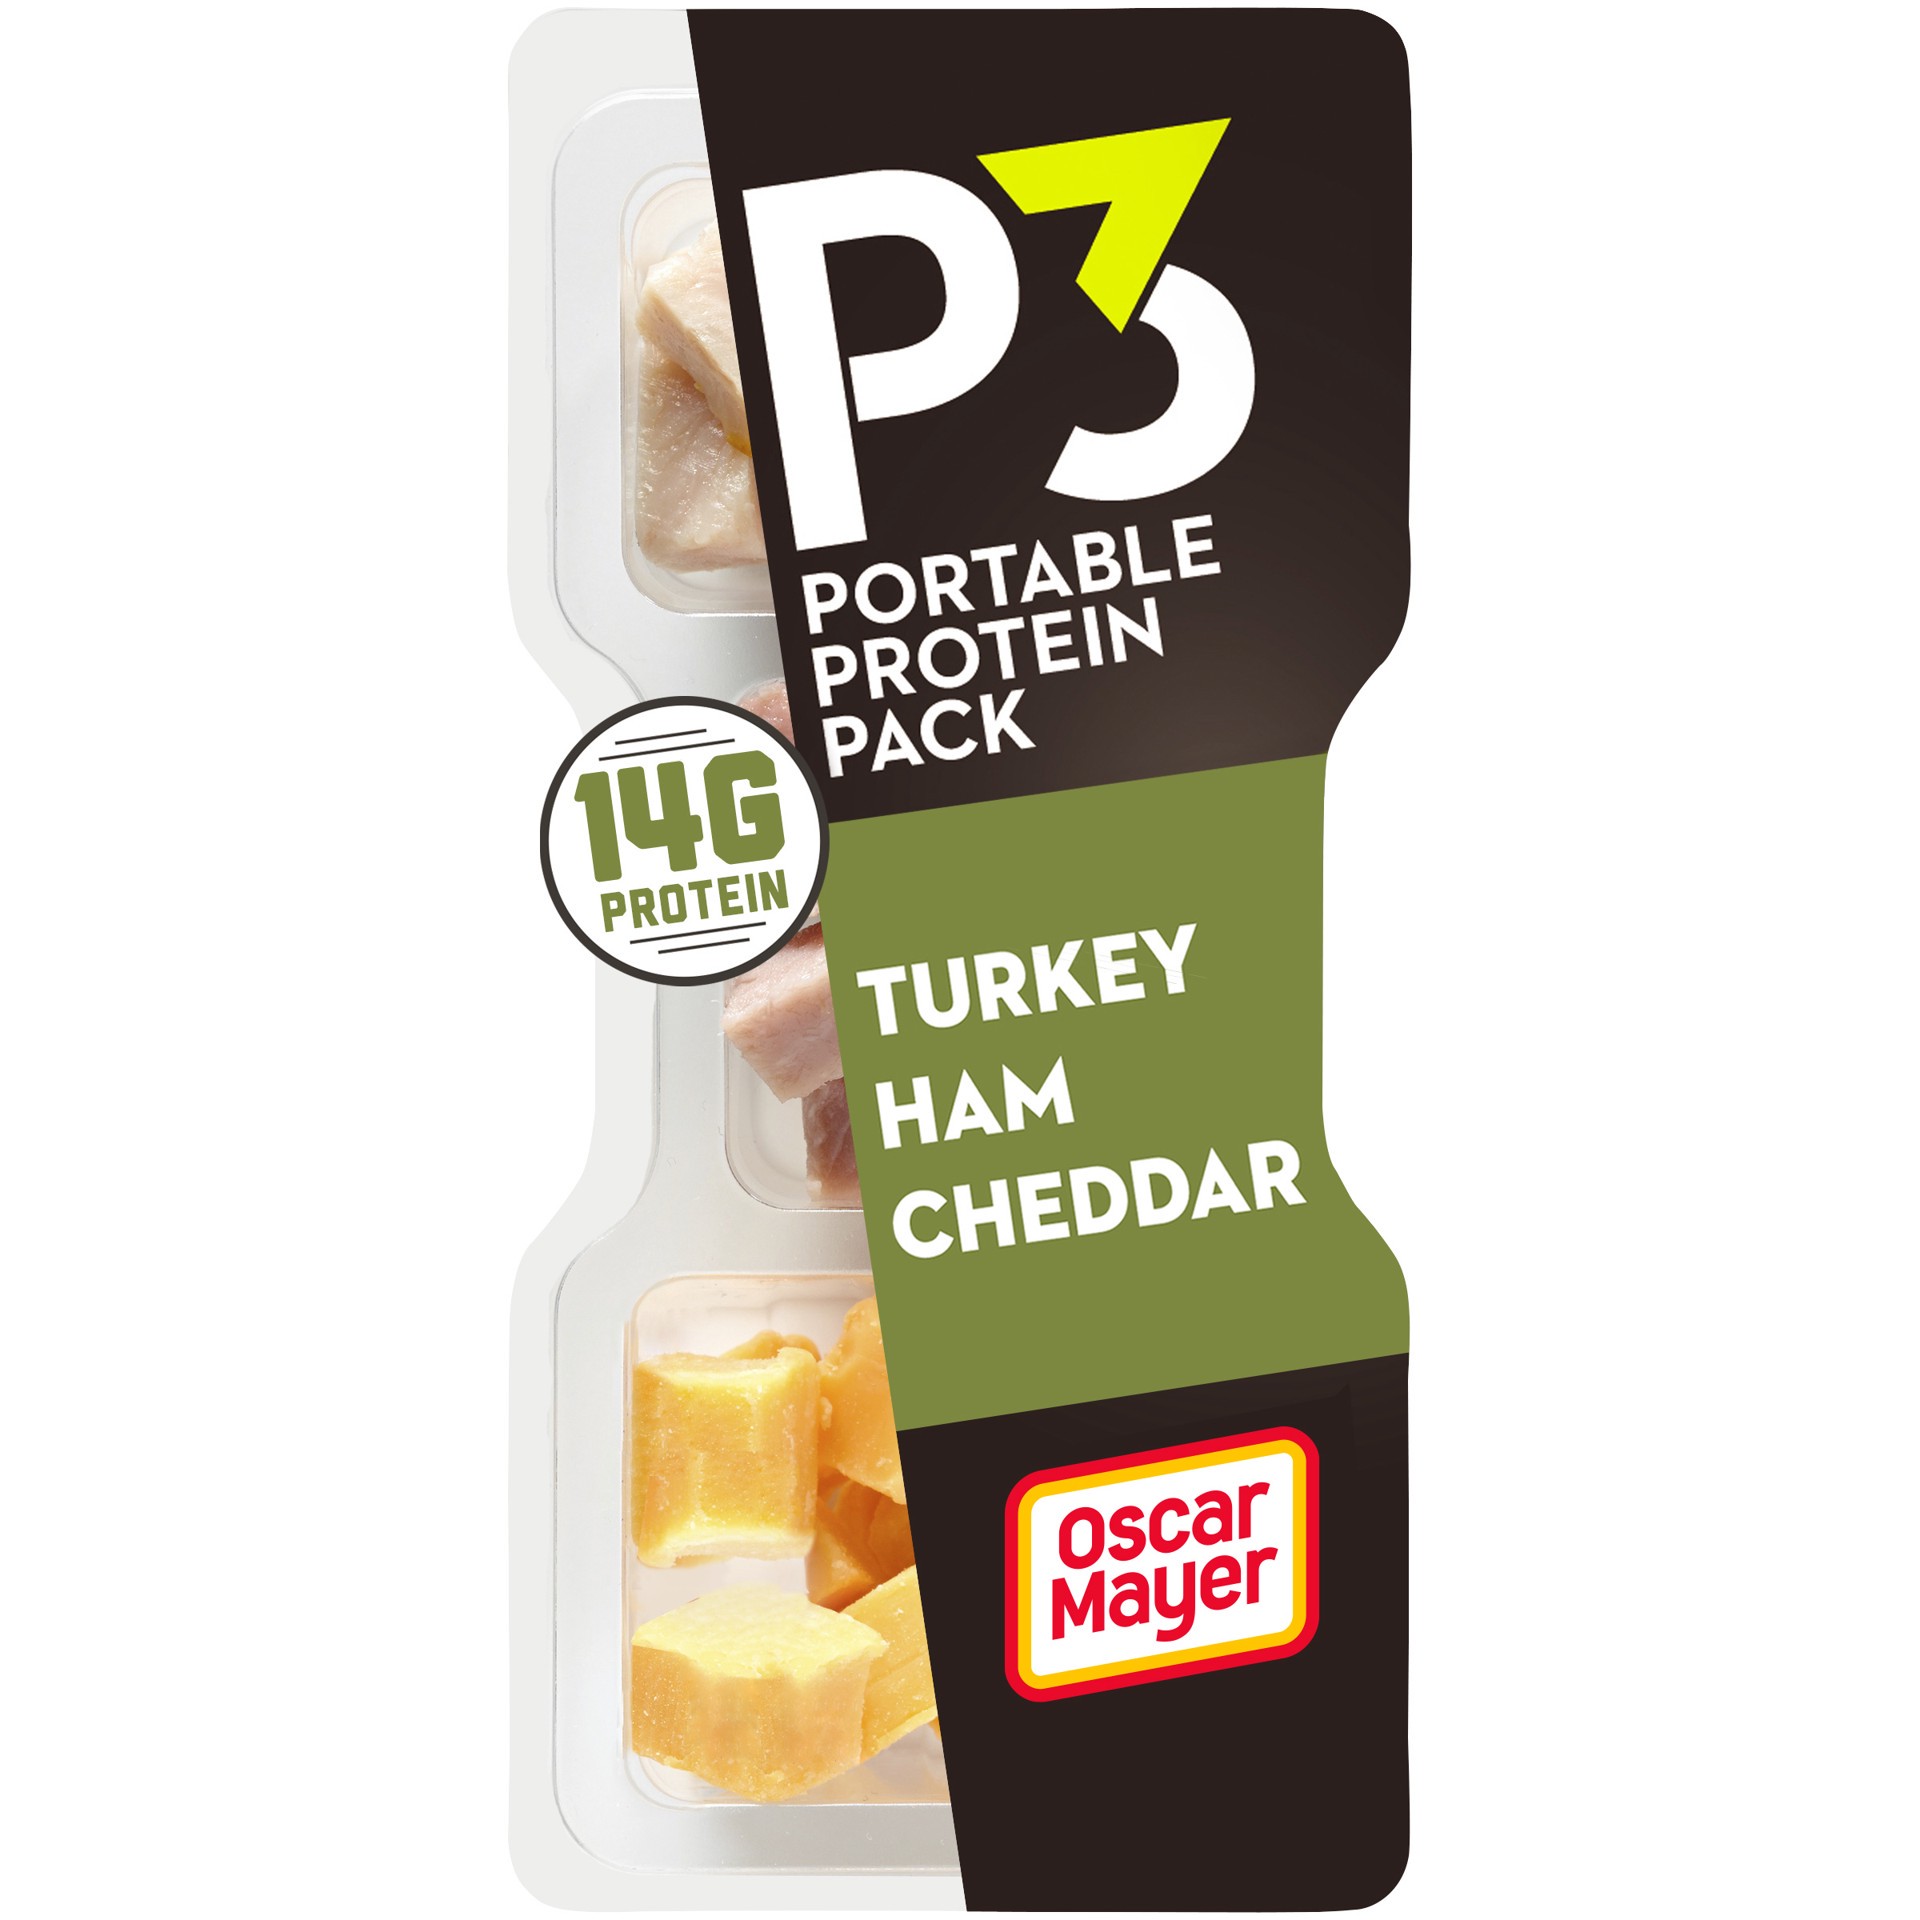 slide 1 of 7, P3 Portable Protein Snack Pack with Turkey, Ham & Cheddar Cheese Tray, 2.3 oz